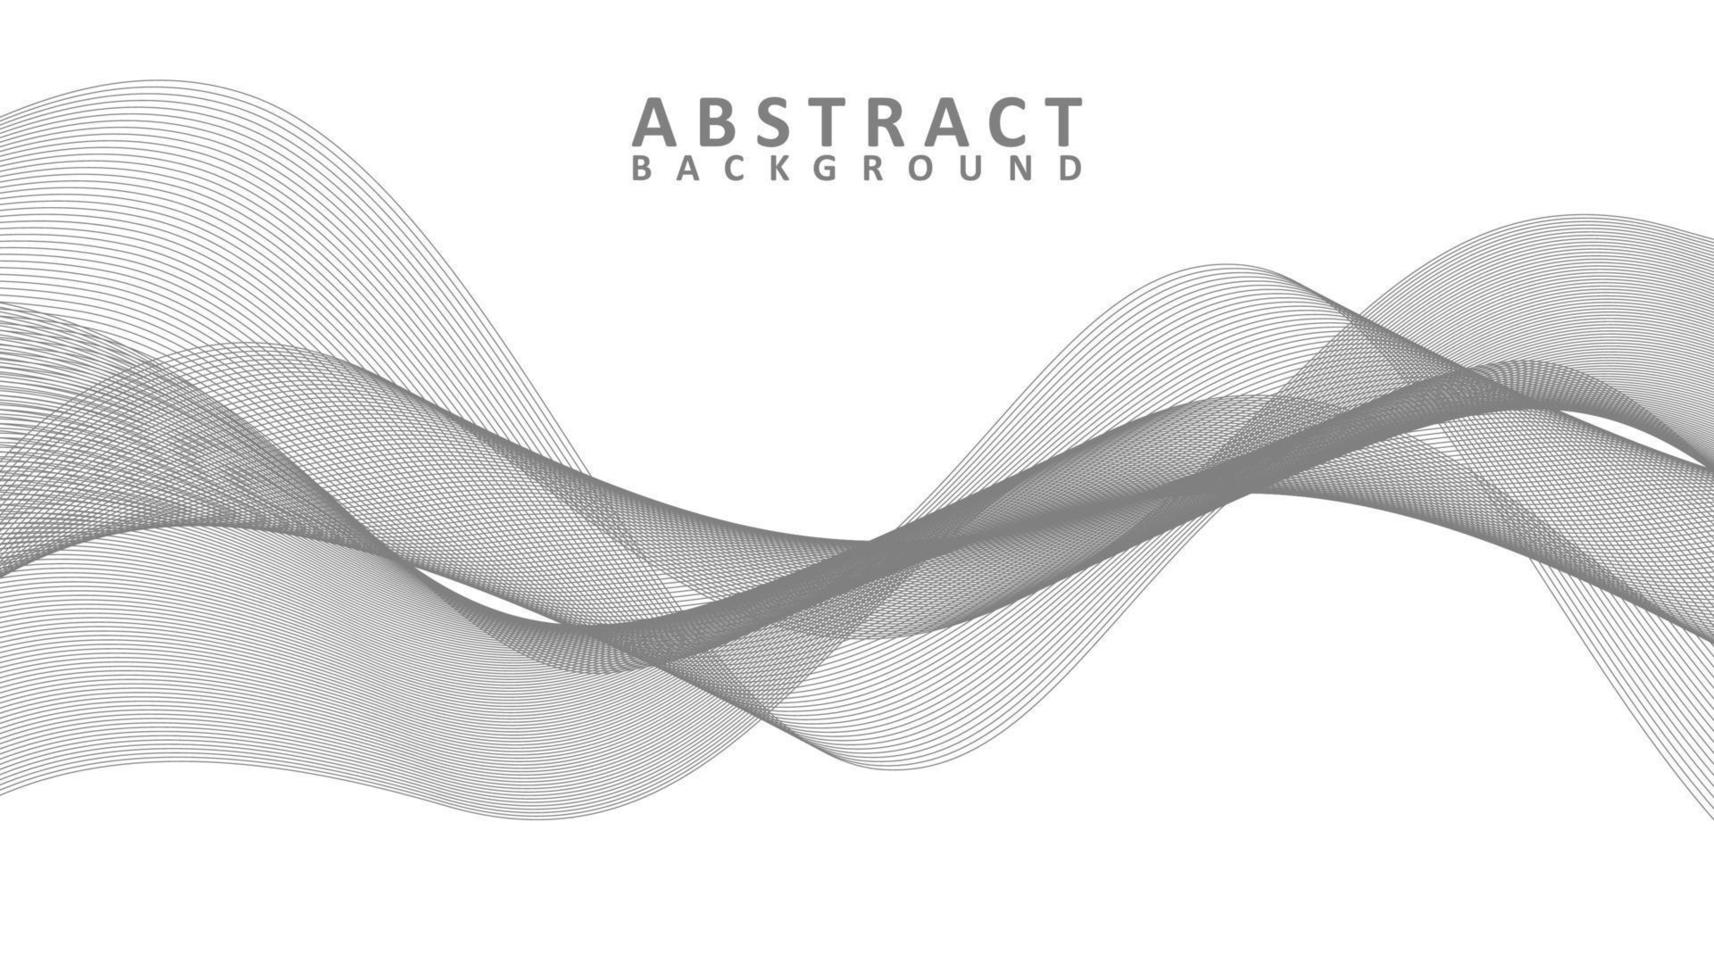 Abstract grey and white waves background vector